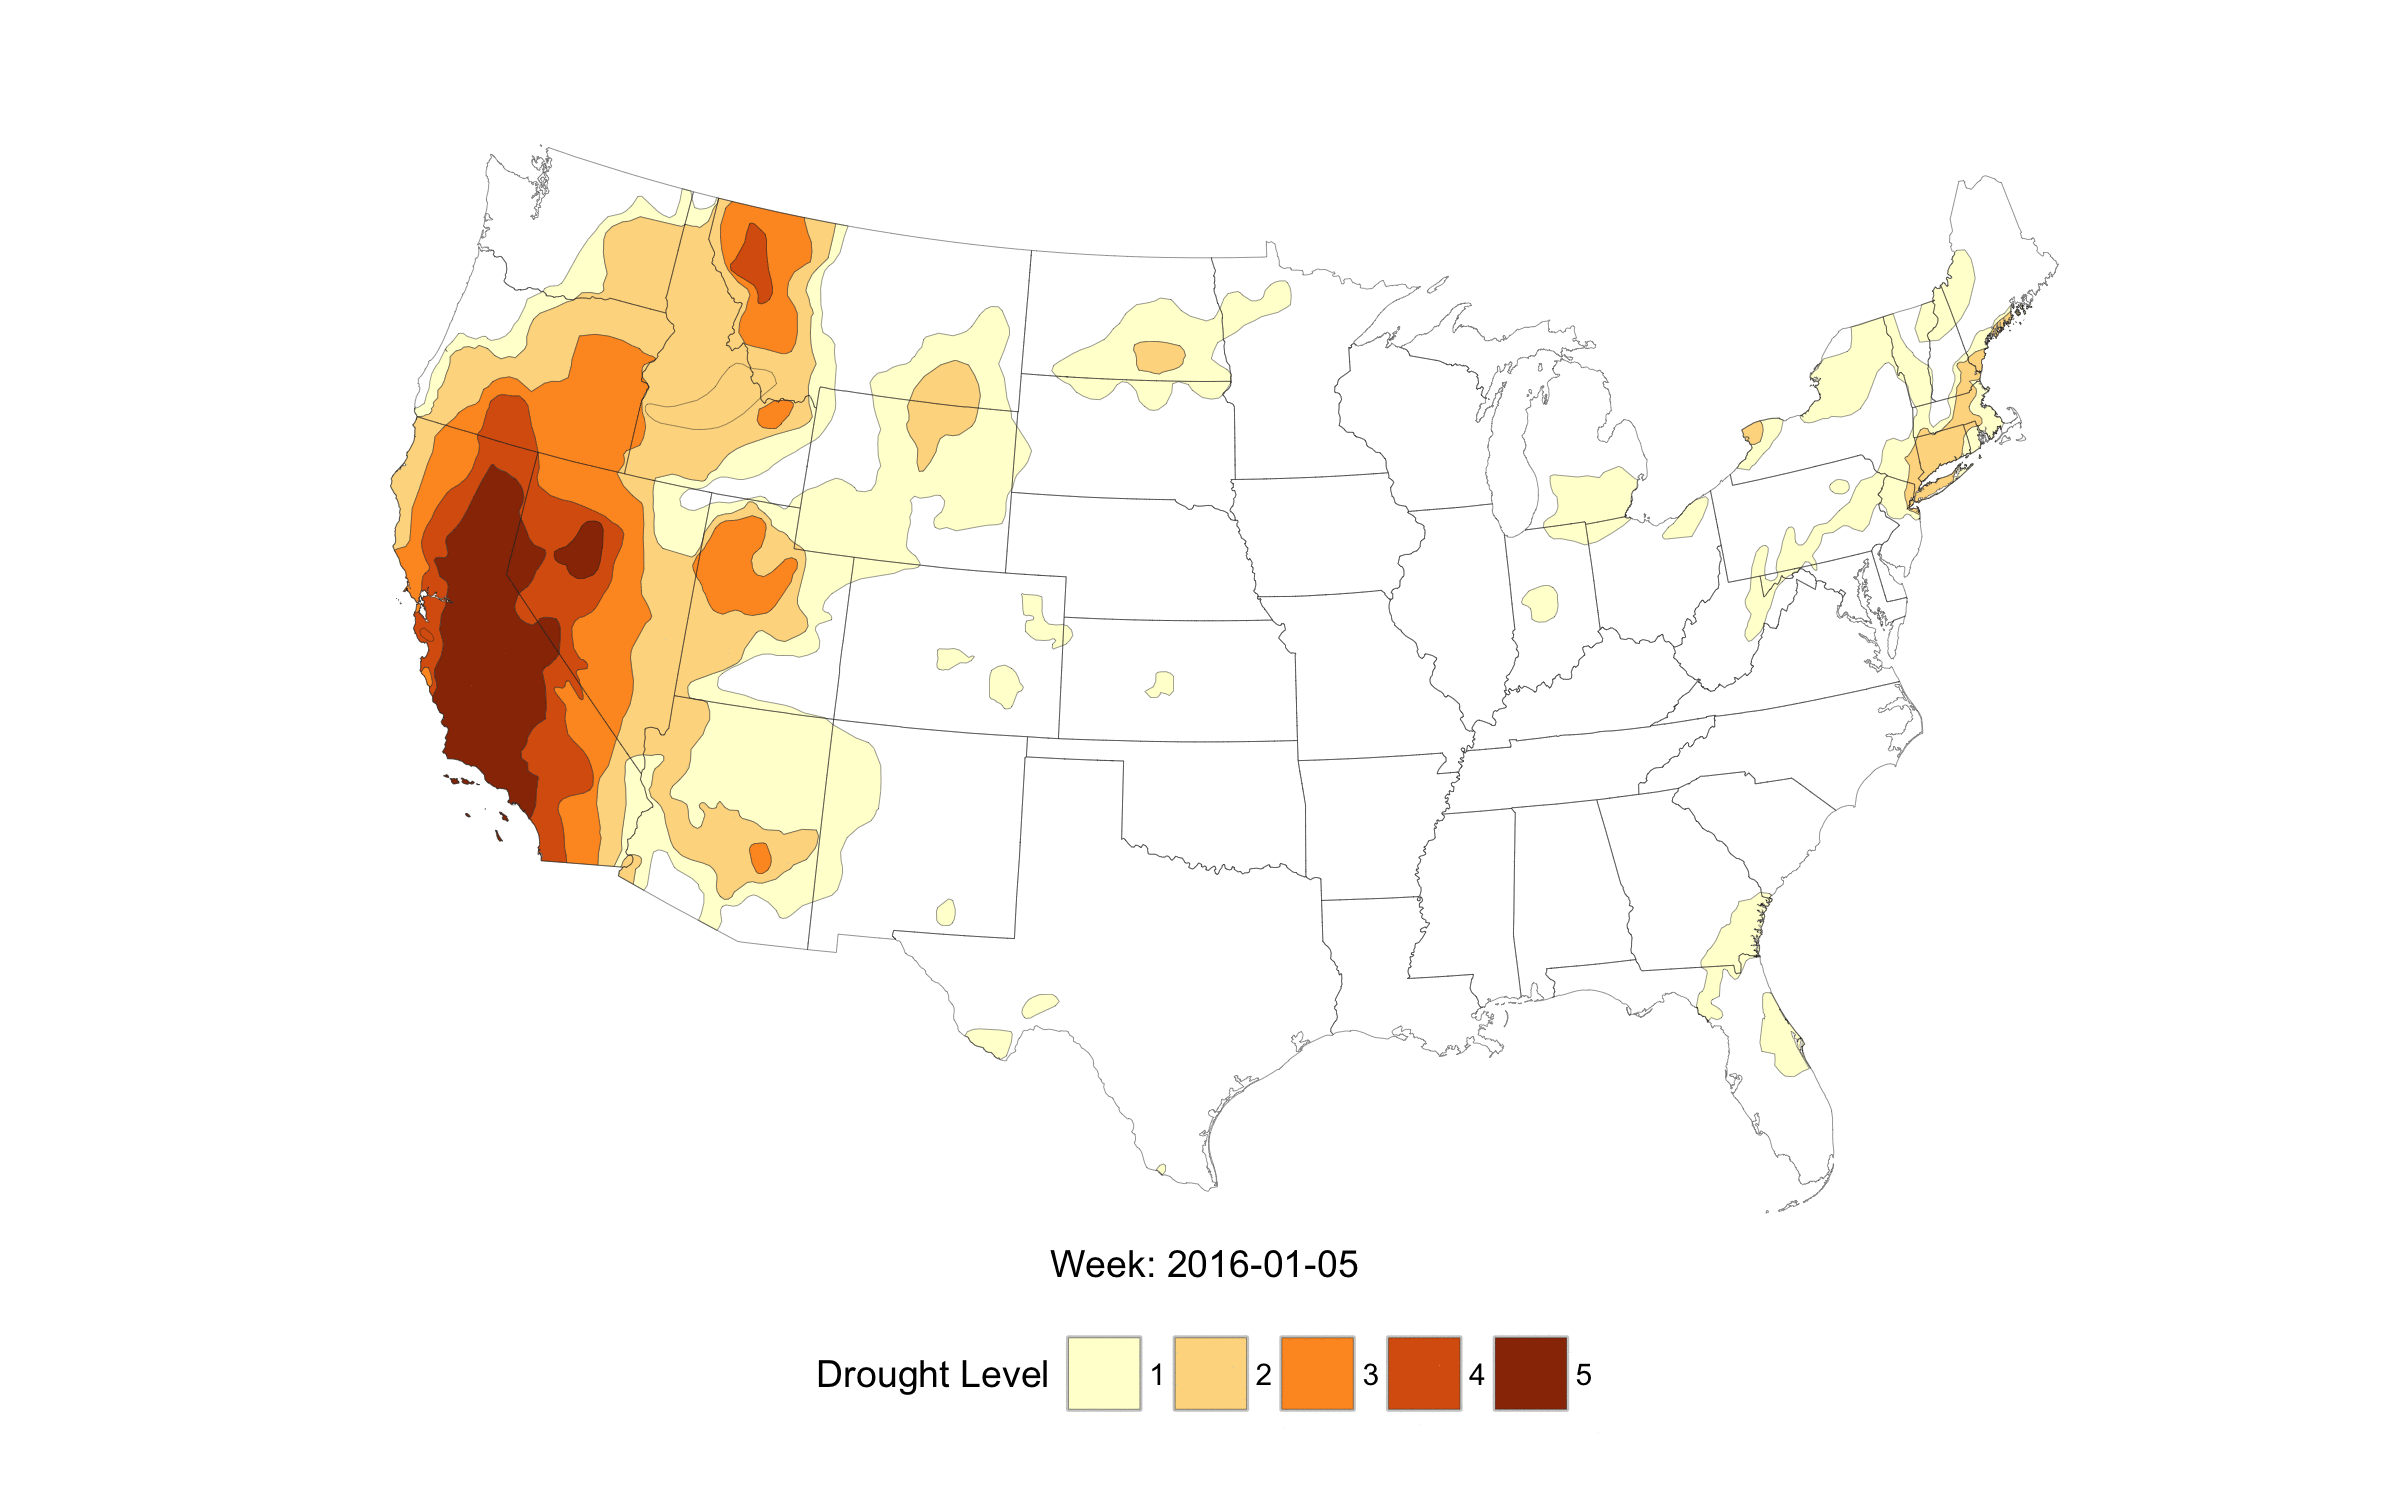 U.S. Drought Animations with the “Witch’s Brew”